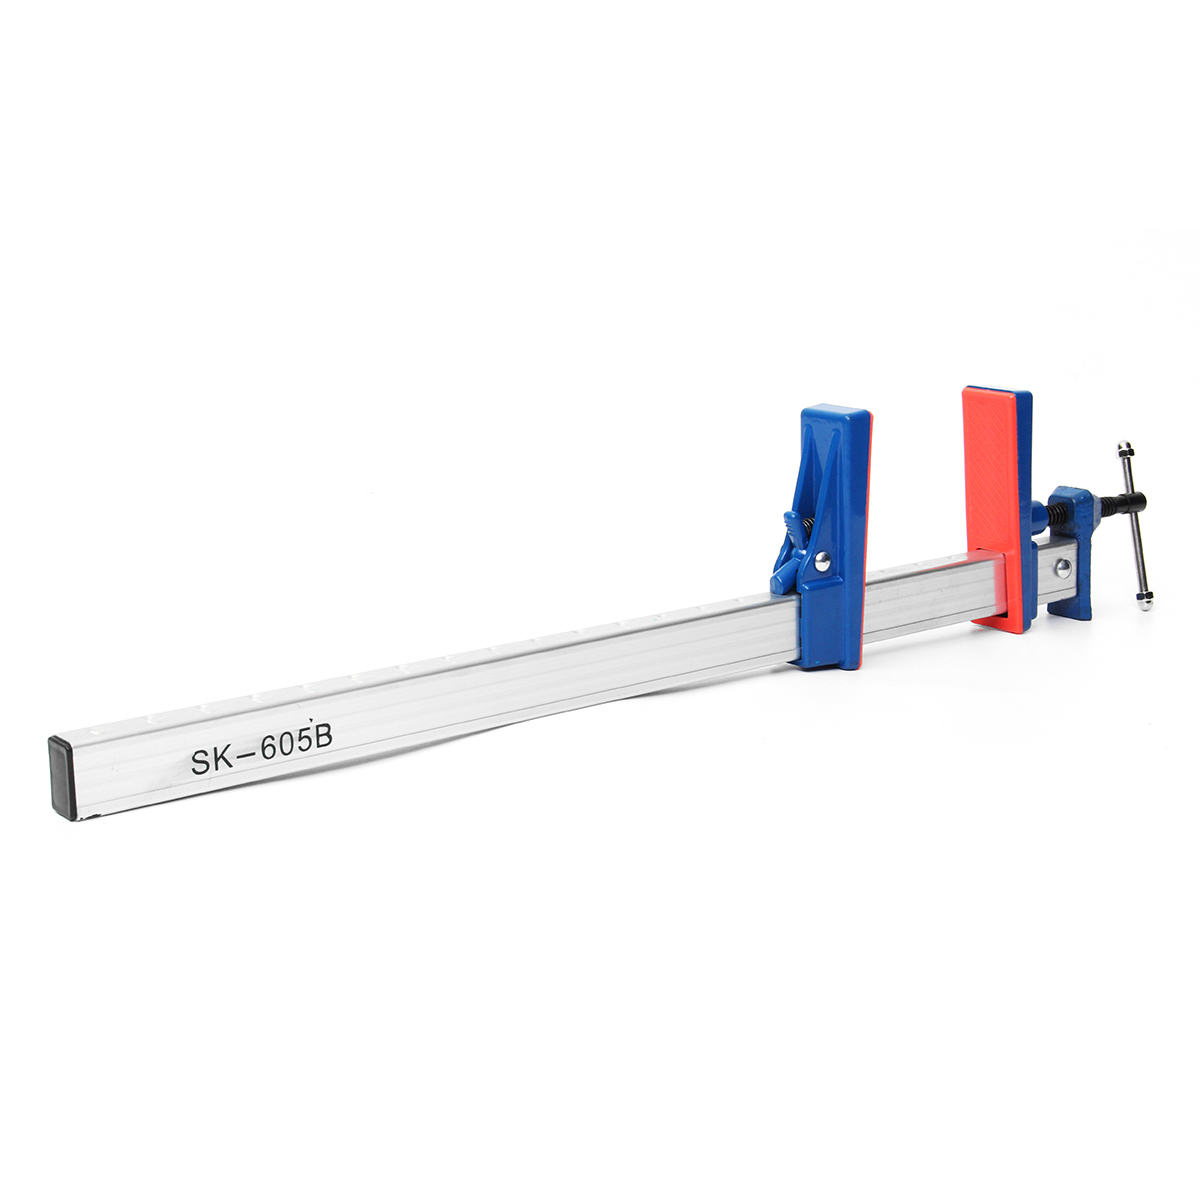 2436-Inch-Aluminum-Alloy-F-Clamp-Bar-Quick-Release-Woodworking-Clamp-Parallel-Adjustable-Heavy-Duty--1361735-8